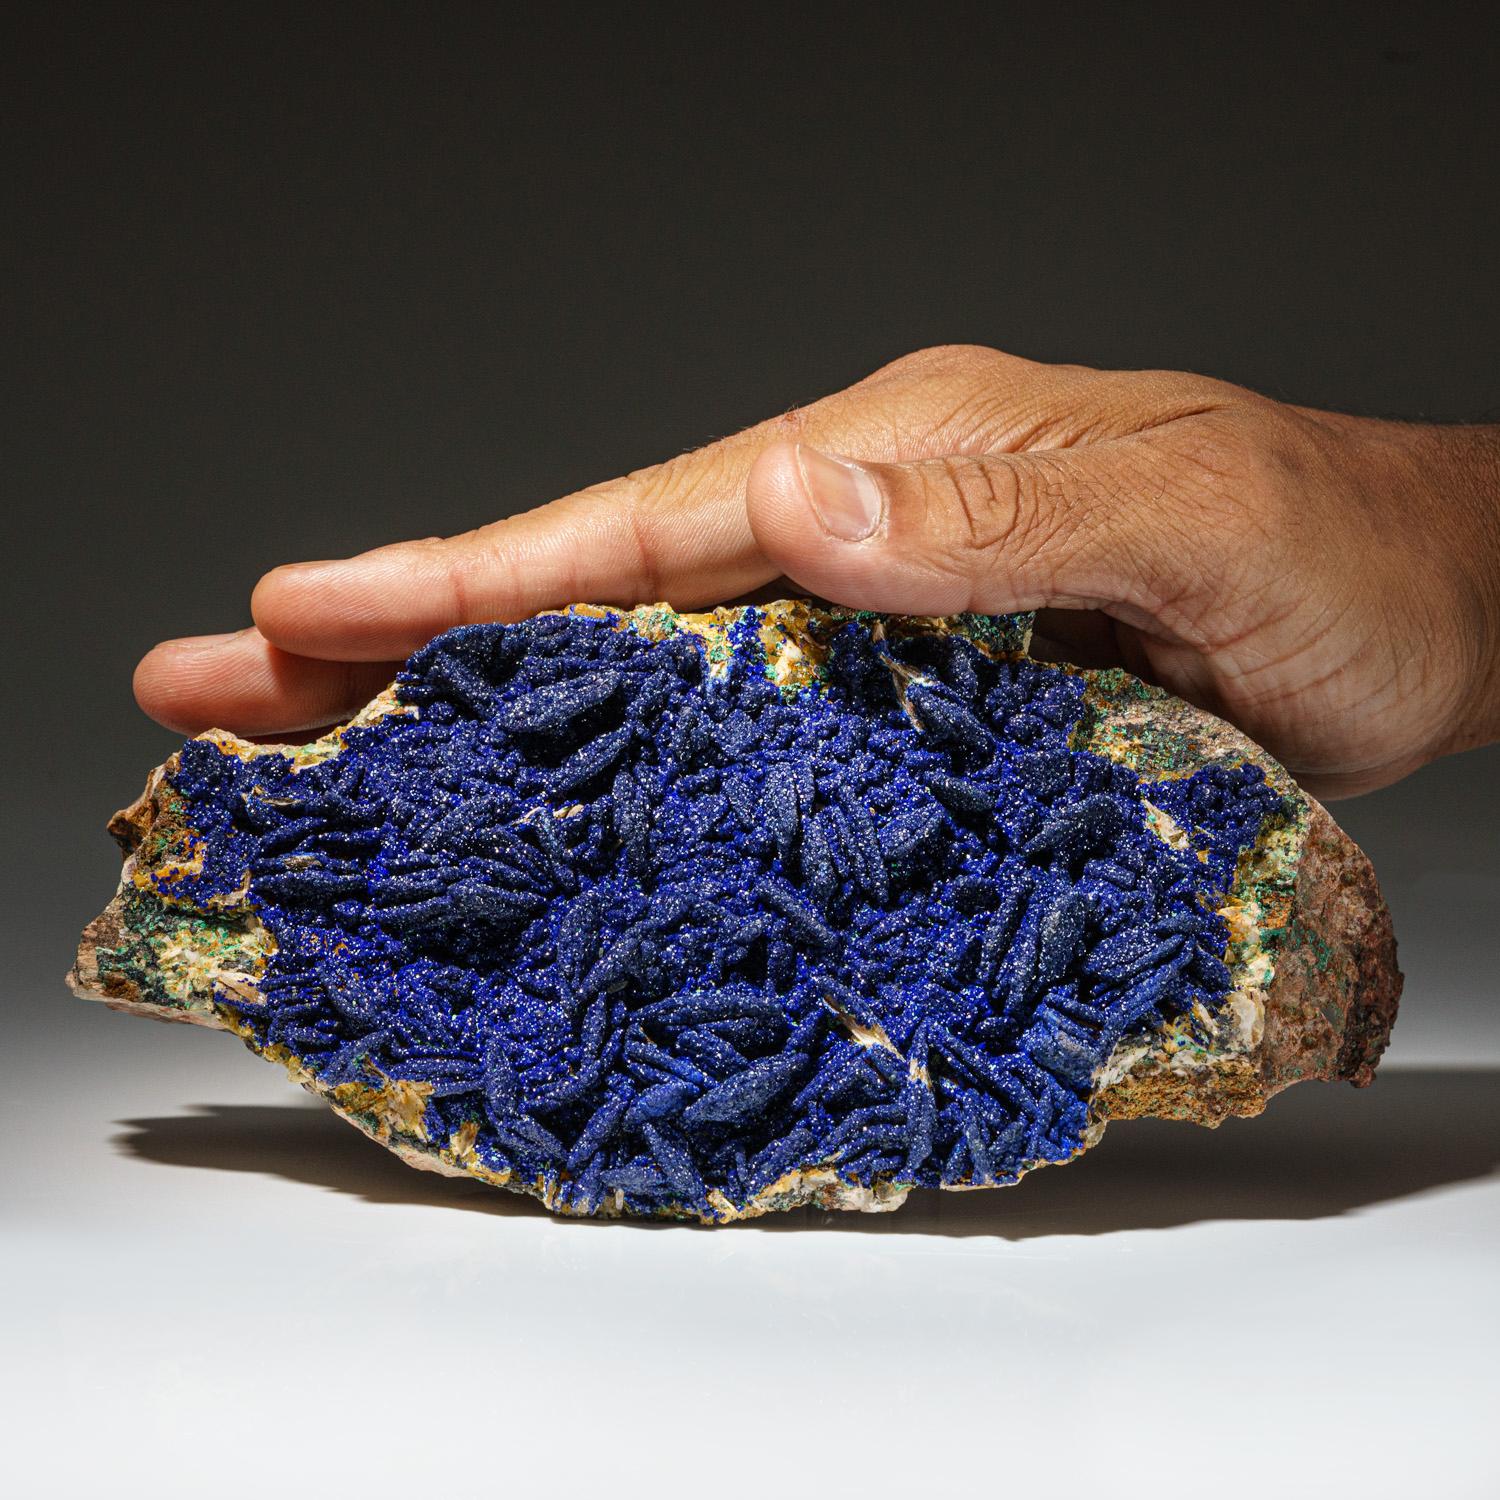 From Ahouli Mines, Aouli, 7 km northeast of Mibladen, Zeida-Aouli-Mibladen belt, Midelt Province, Morocco

Sparkling blue azurite microcrystals with areas of green malachite covering front and rear of massive azurite matrix.


Weight: 460.8 grams,